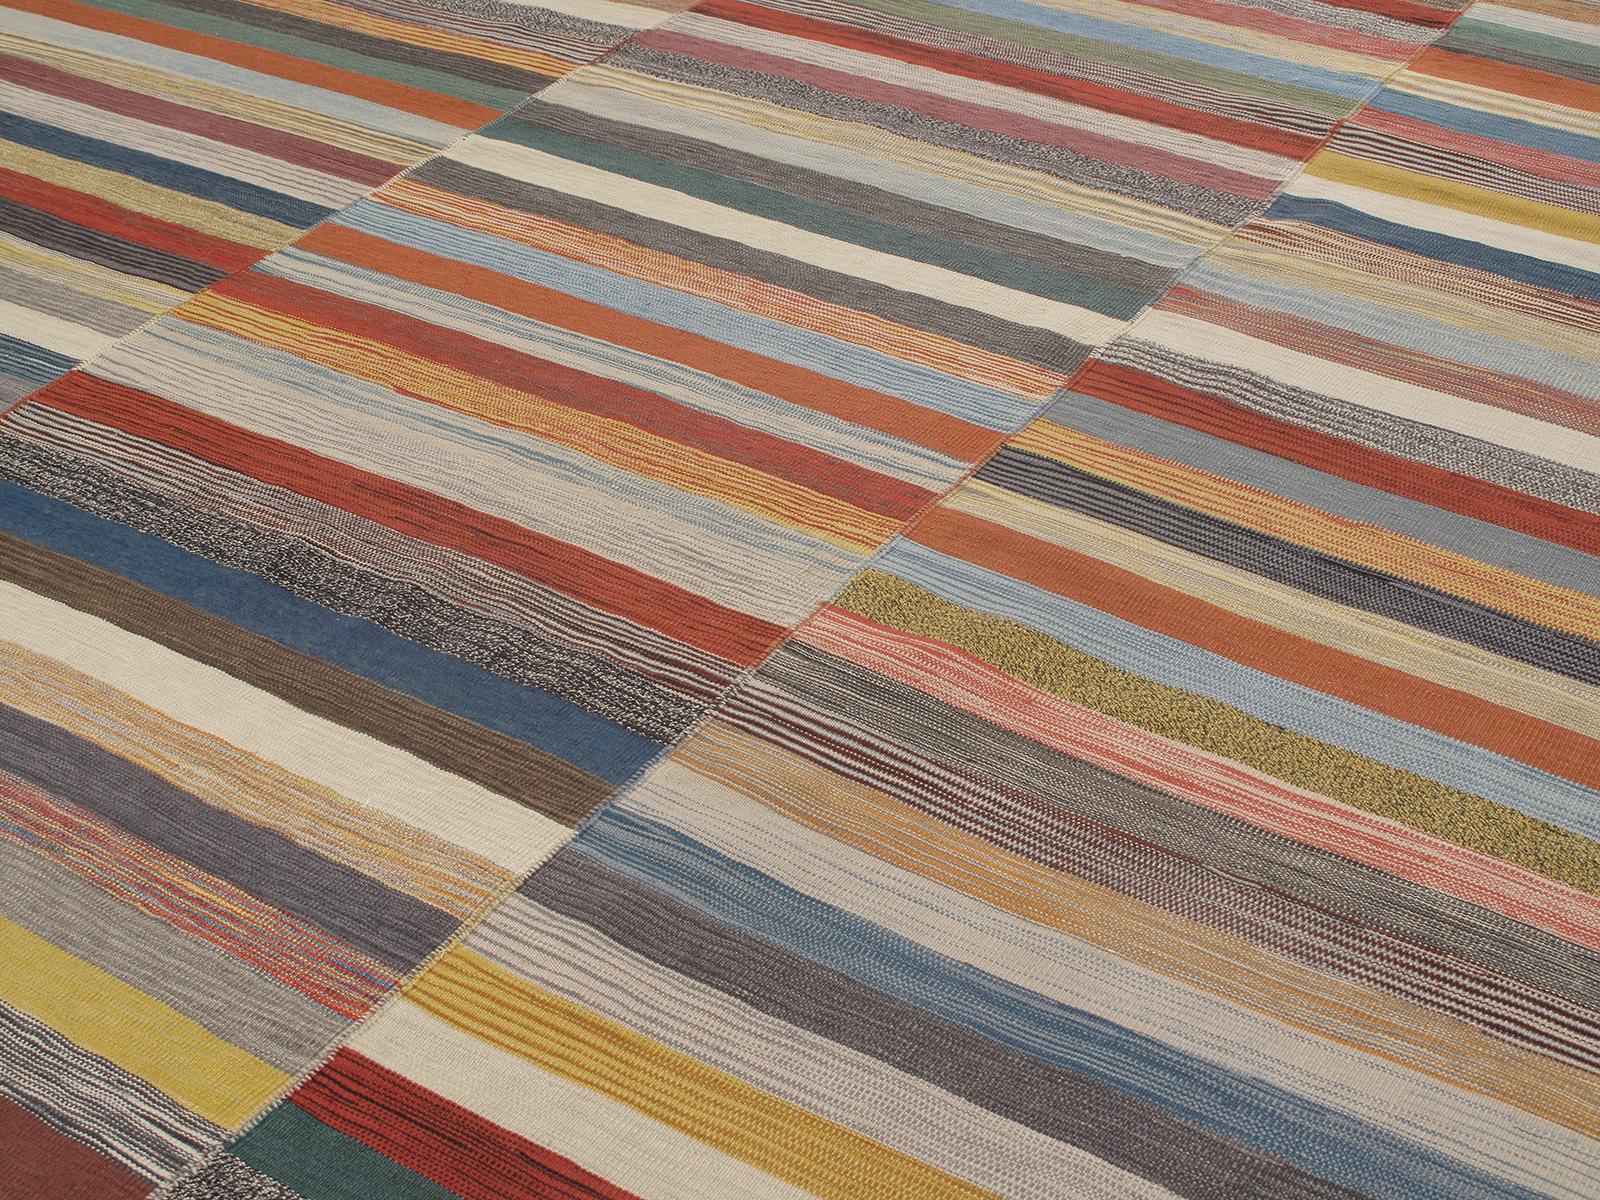 Our Mazandaran collection highlights the Minimalist sophistication that existed long before the modern era. The collection was inspired by the kilims that were woven by Persian women in the Mazandaran Province in northwest of Iran near the Caspian